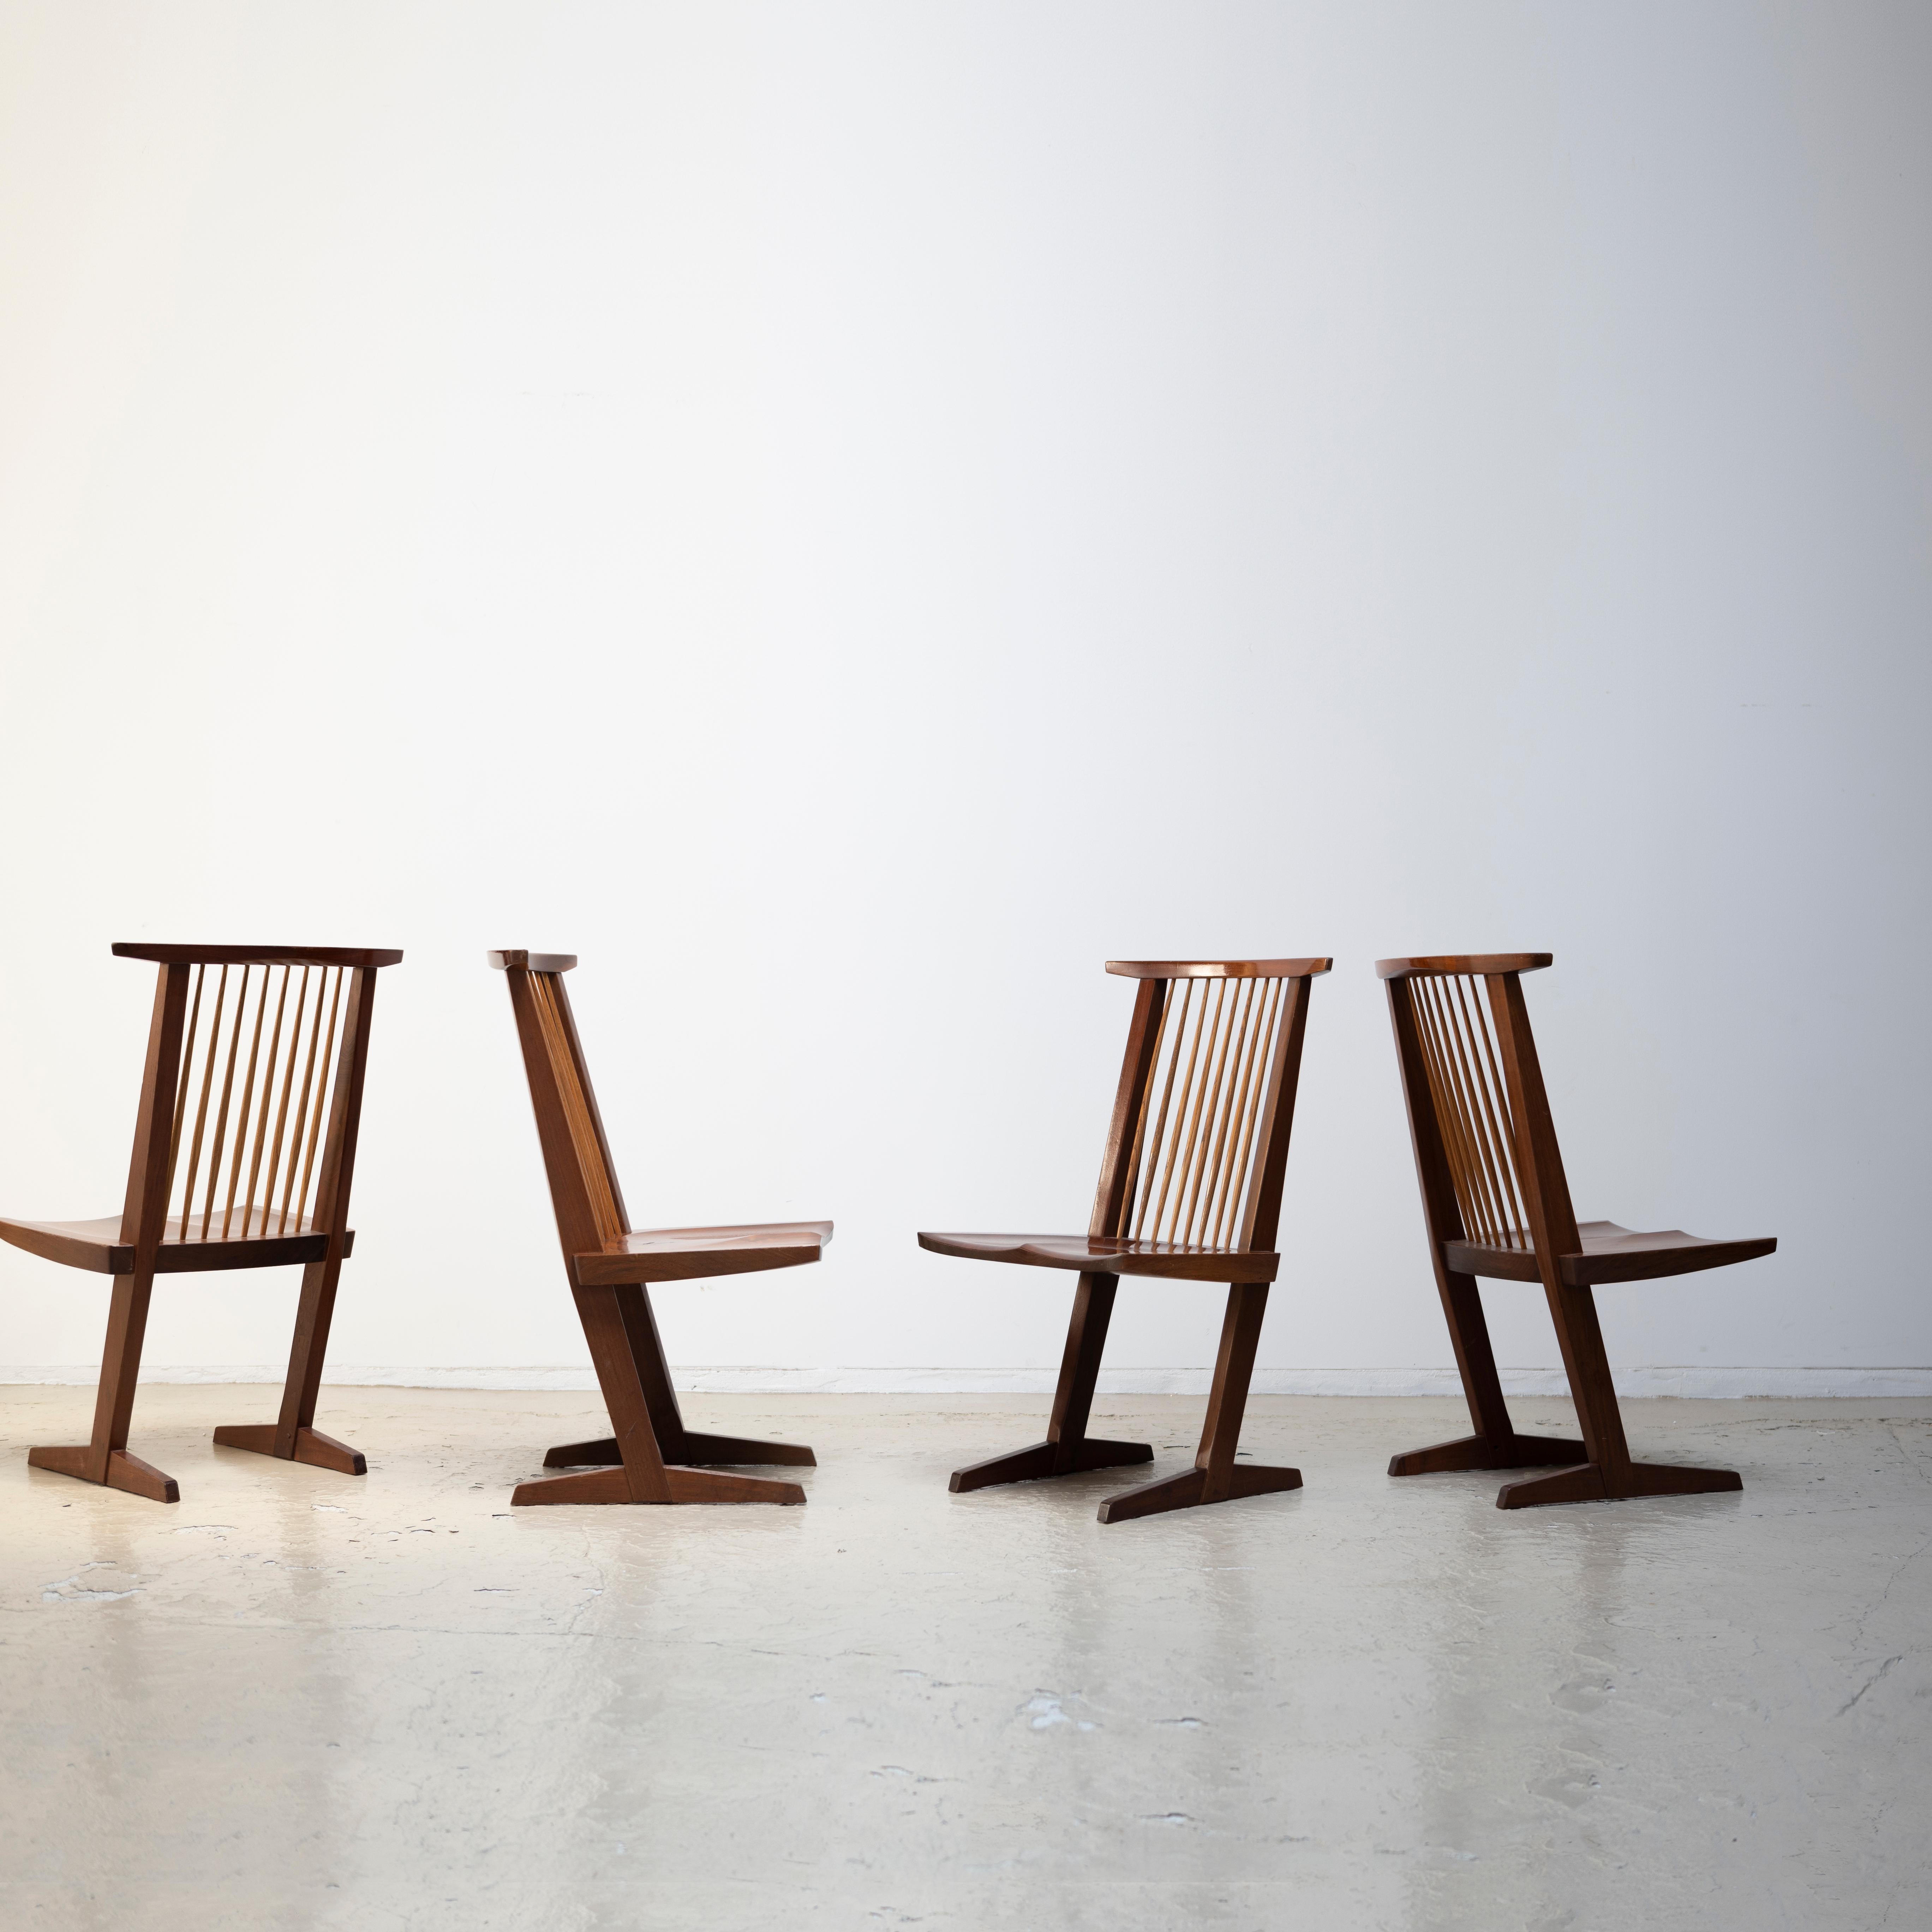 A set of four Conoid chairs designed by George Nakashima.
1970s.
Manufactured by Sakura Seisakusho in Kagawa, Japan.
This model was invented in 1959 and started to be sold in Japan in 1964.

Sakura Seisakusho is only one manufacturer of George